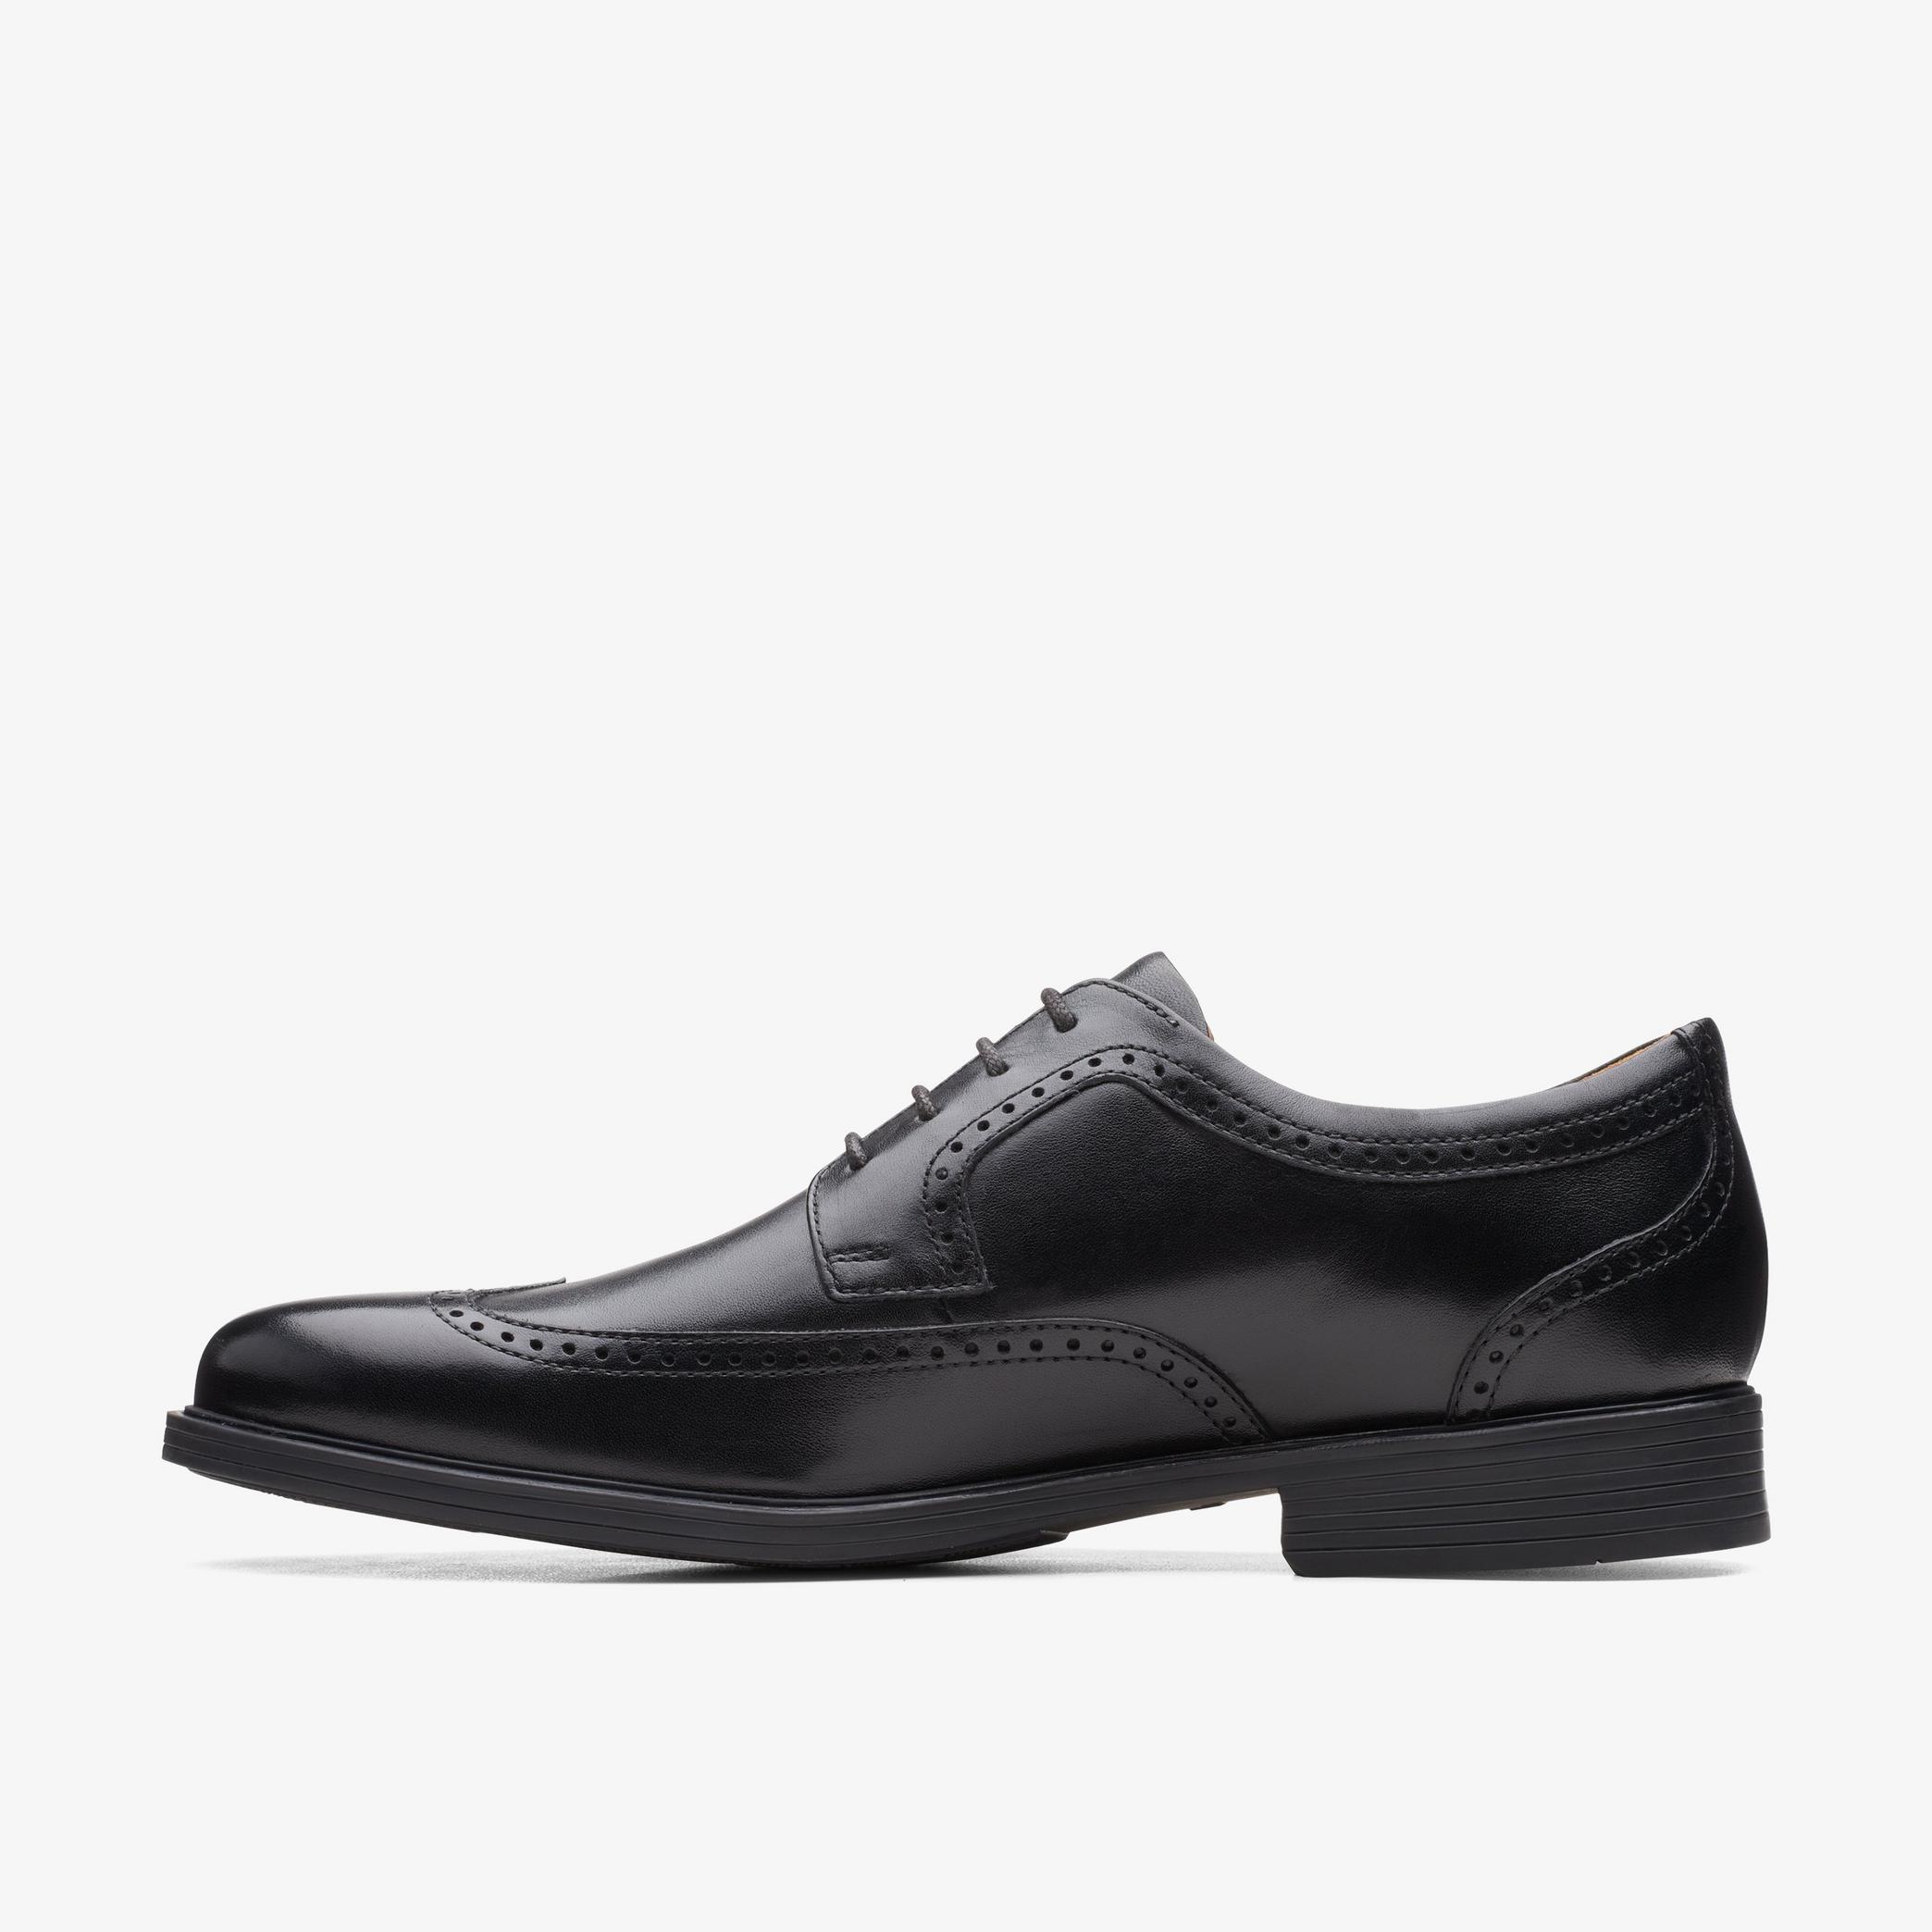 Whiddon Wing Black Leather Shoes, view 2 of 6